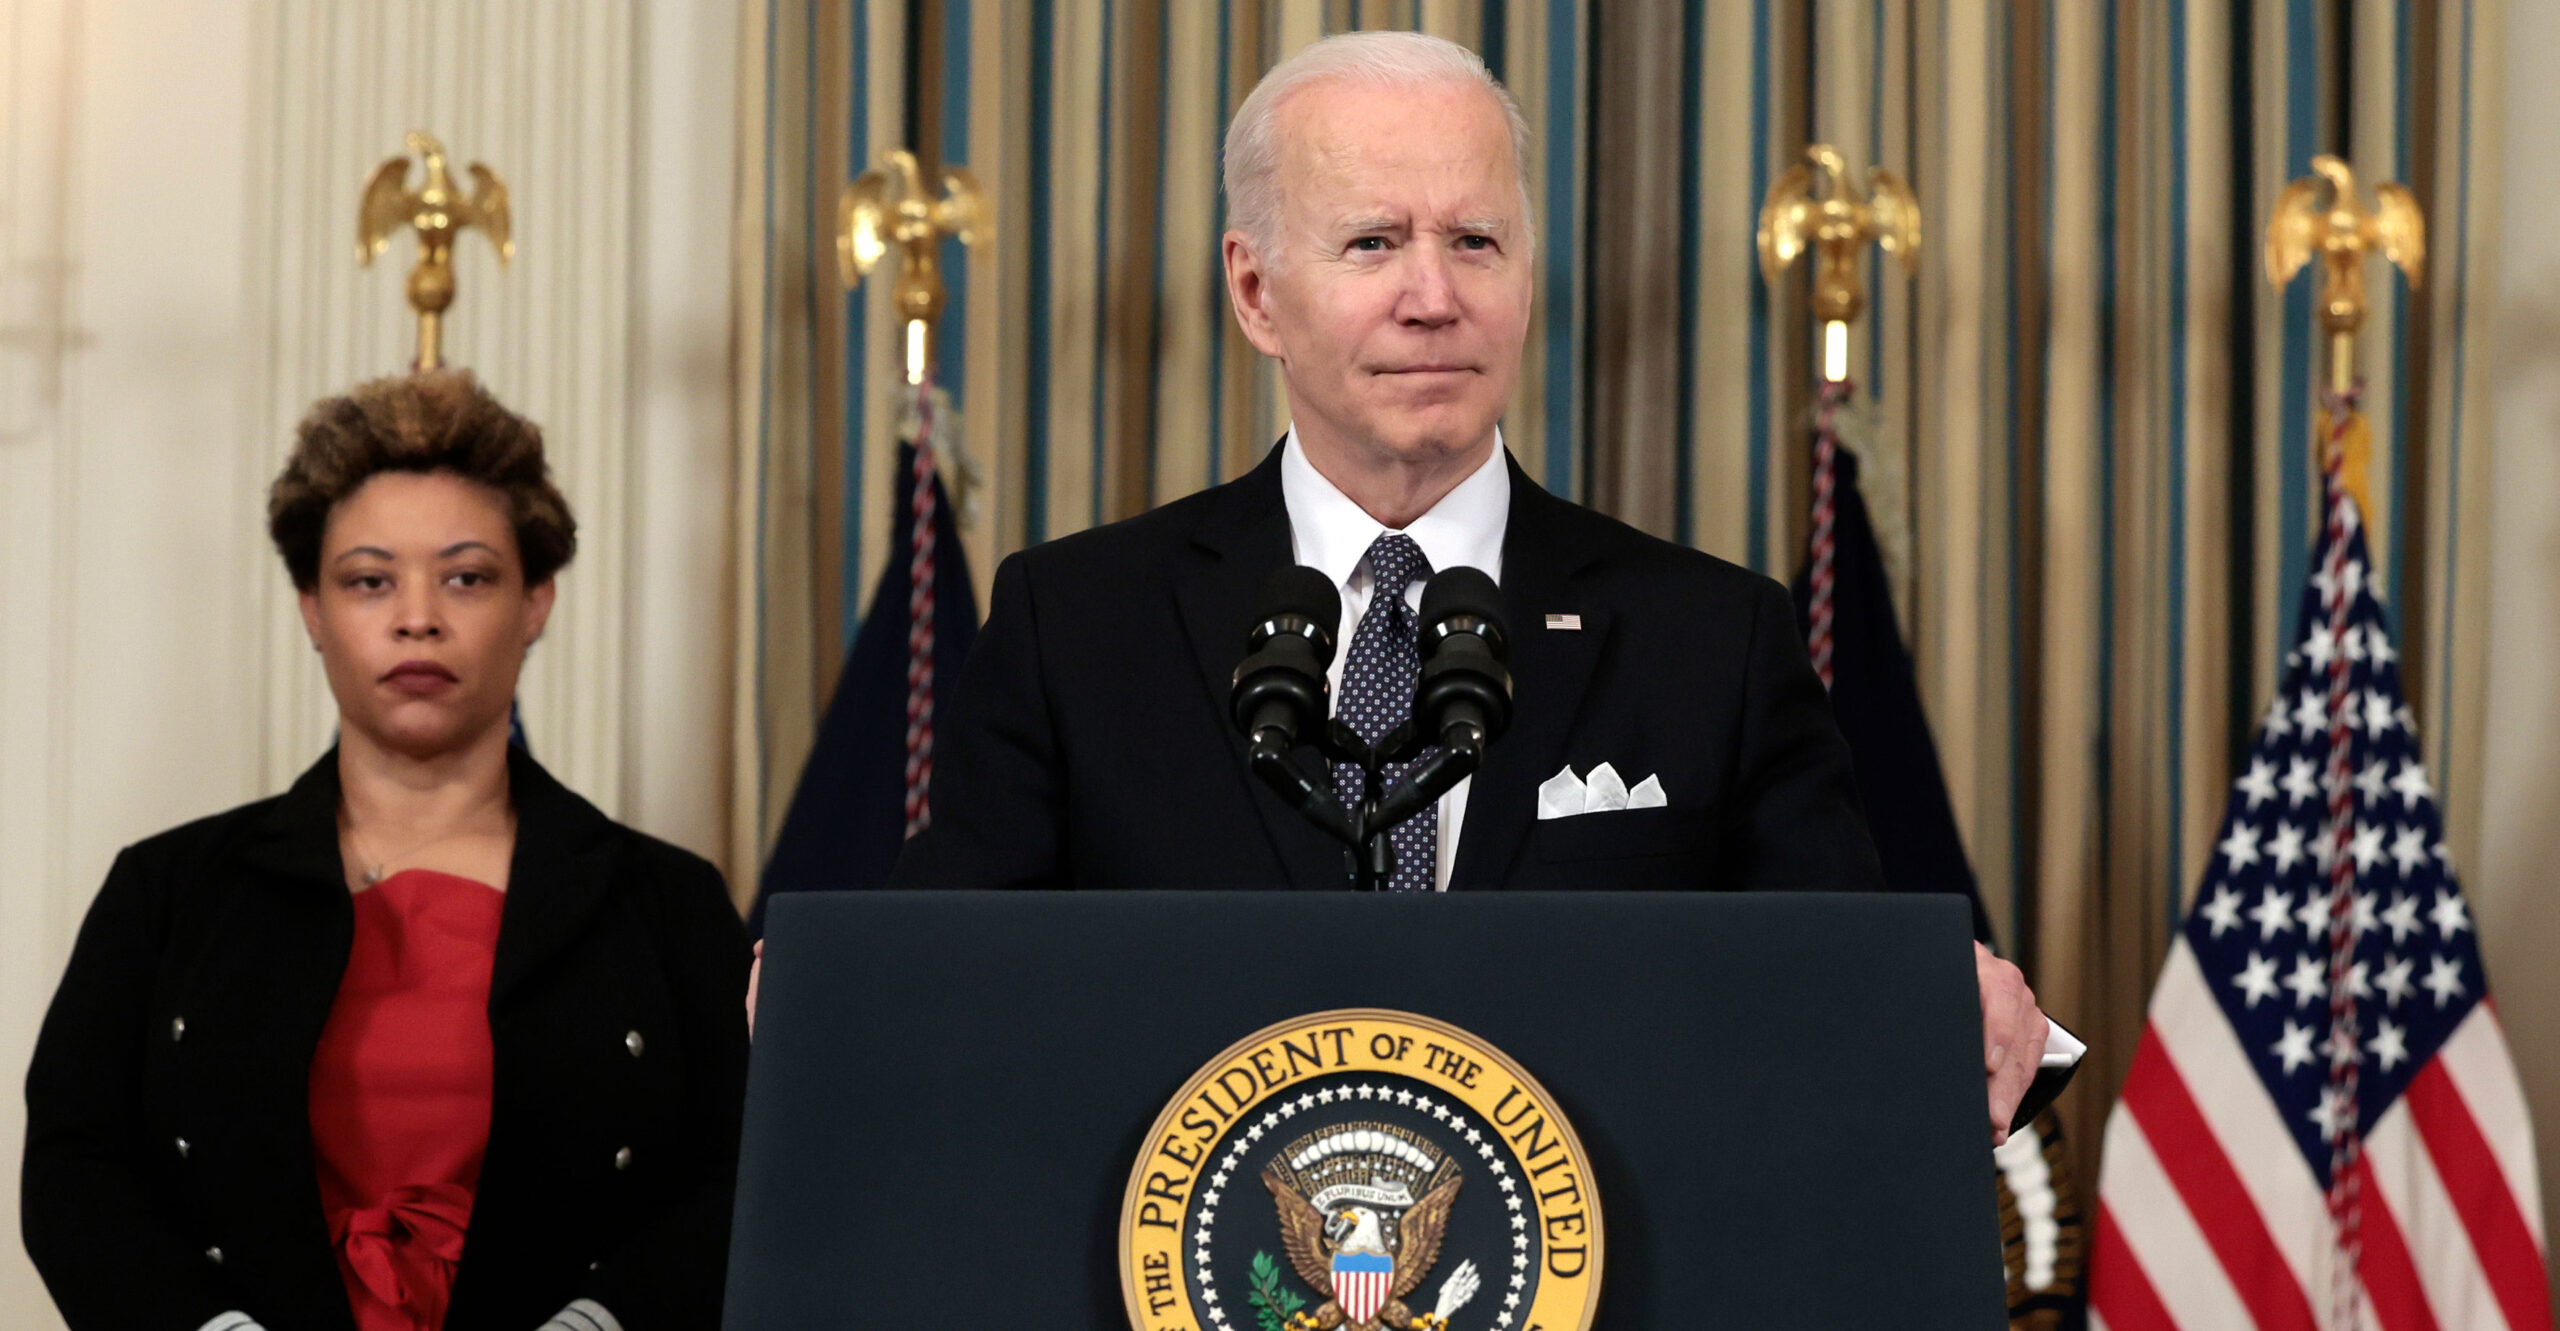 5 Big Problems With Biden’s Big&Government Budget